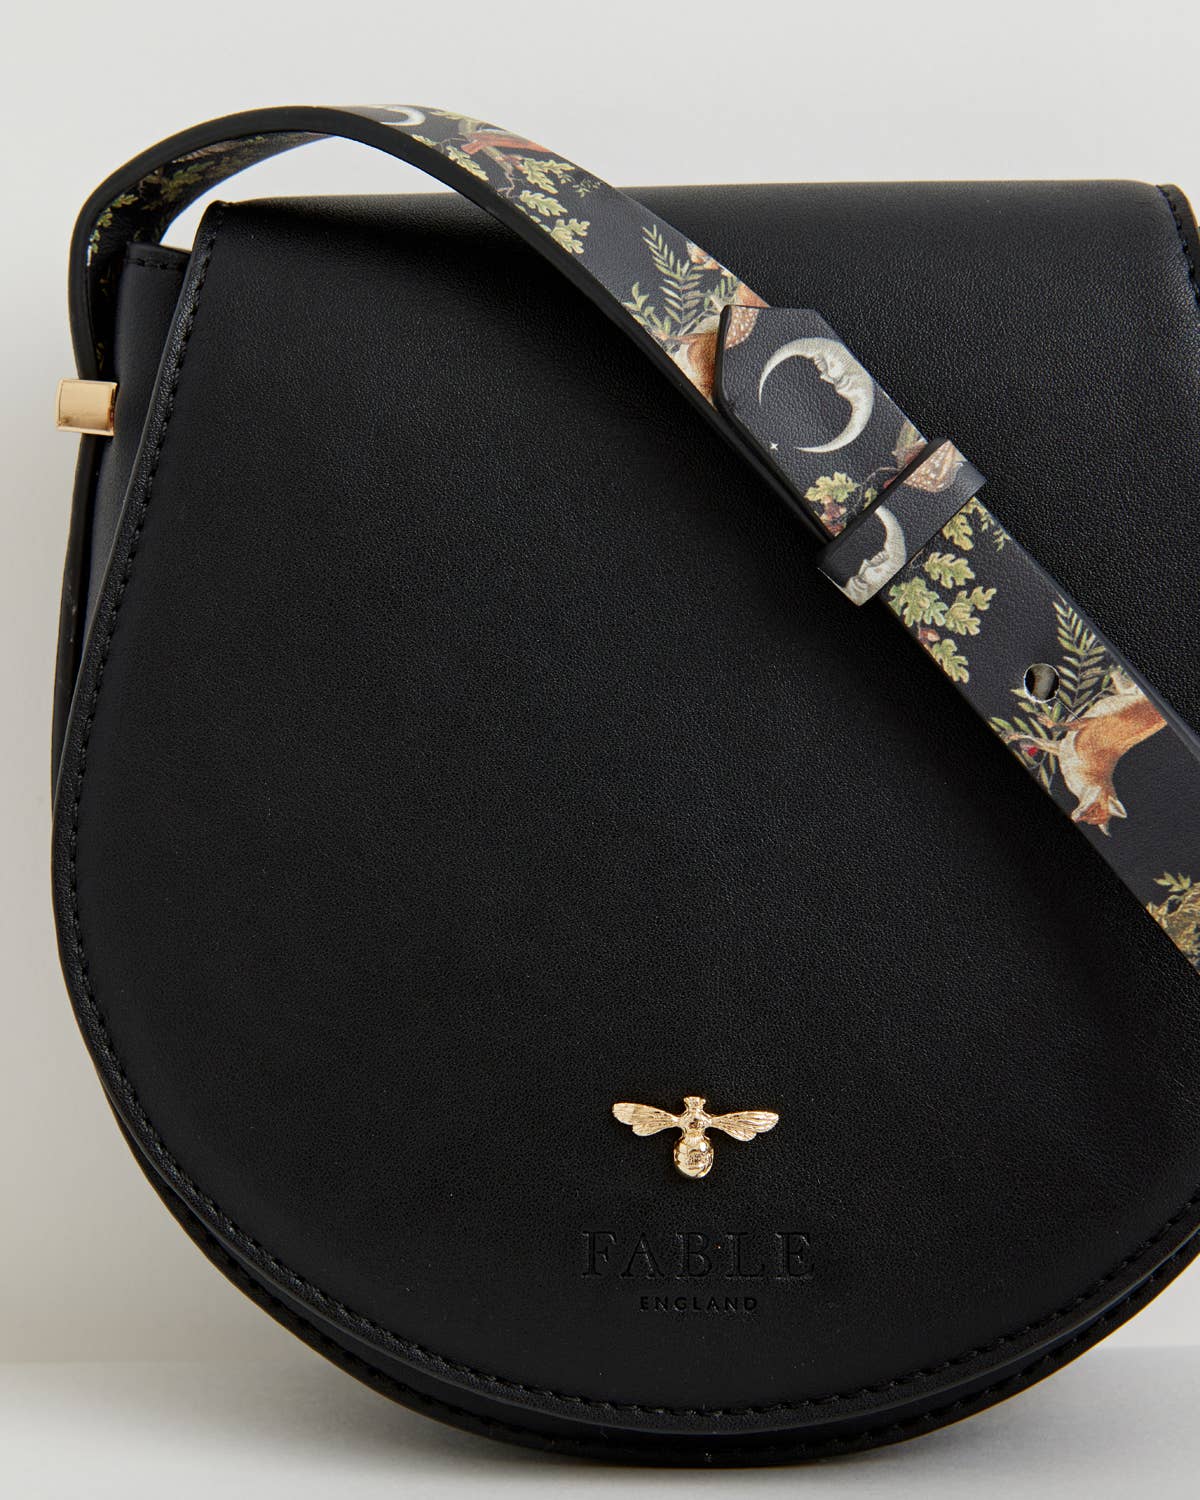 A Night's Tale Saddle Bag Black - Out of the Blue